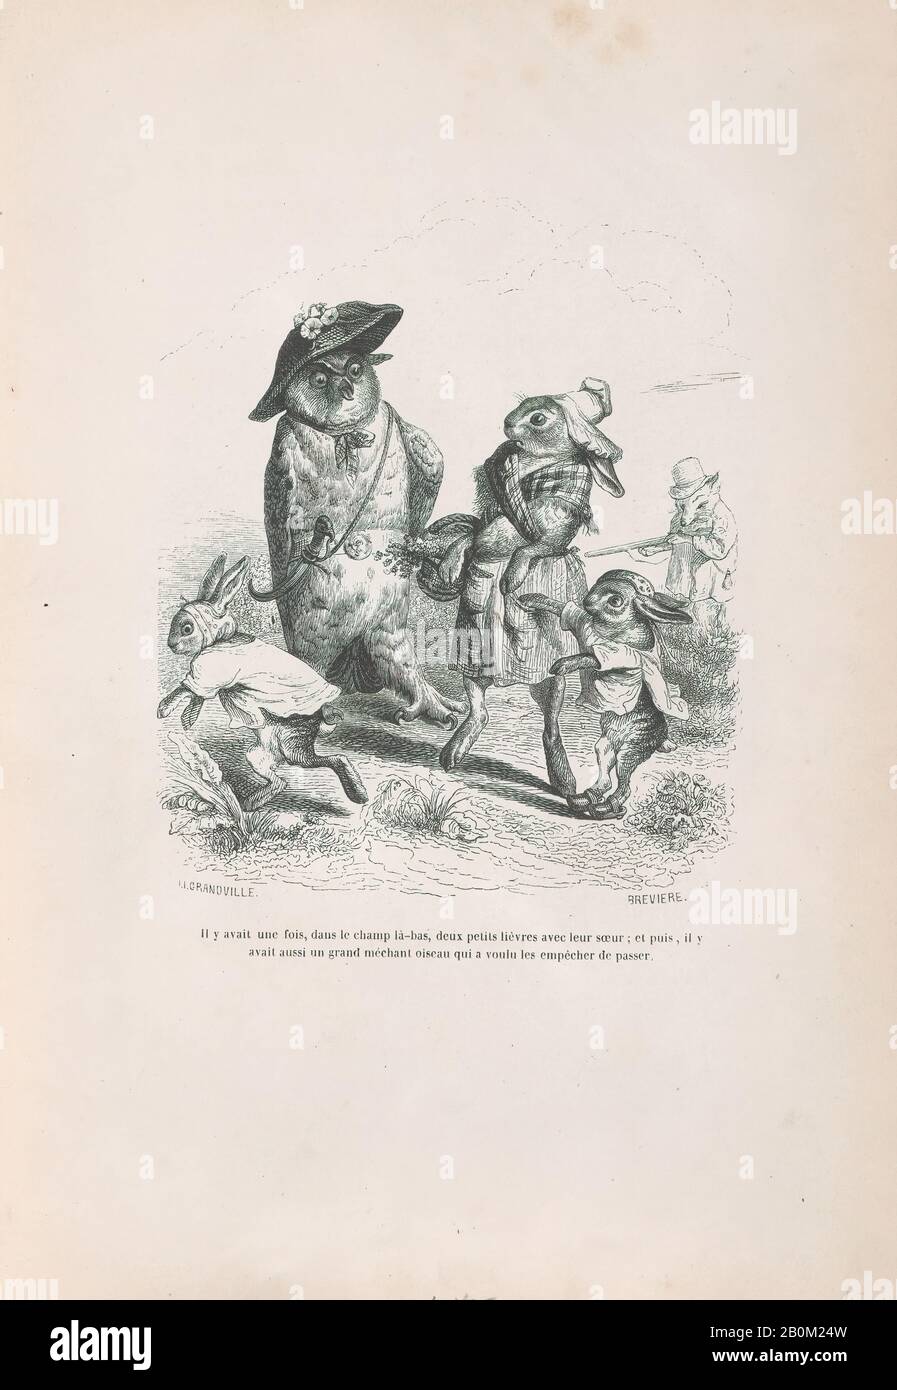 J. J. Grandville, 'There was once, in the camp there, two little hares with their sister, and then there was also a big bad bird who wanted to stop them from passing' from Scenes from the Private and Public Life of Animals, Scenes de la Vie Privèe et Publique des Animaux, J. J. Grandville (French, Nancy 1803–1847 Vanves), Louis-Henri Brevière (French, Forges-les-Eaux 1797–1869 Hyers), Honoré de Balzac (French, Tours 1799–1850 Paris), ca. 1837–47, Wood engraving, Sheet: 10 3/8 × 7 3/16 in. (26.3 × 18.2 cm), Prints Stock Photo